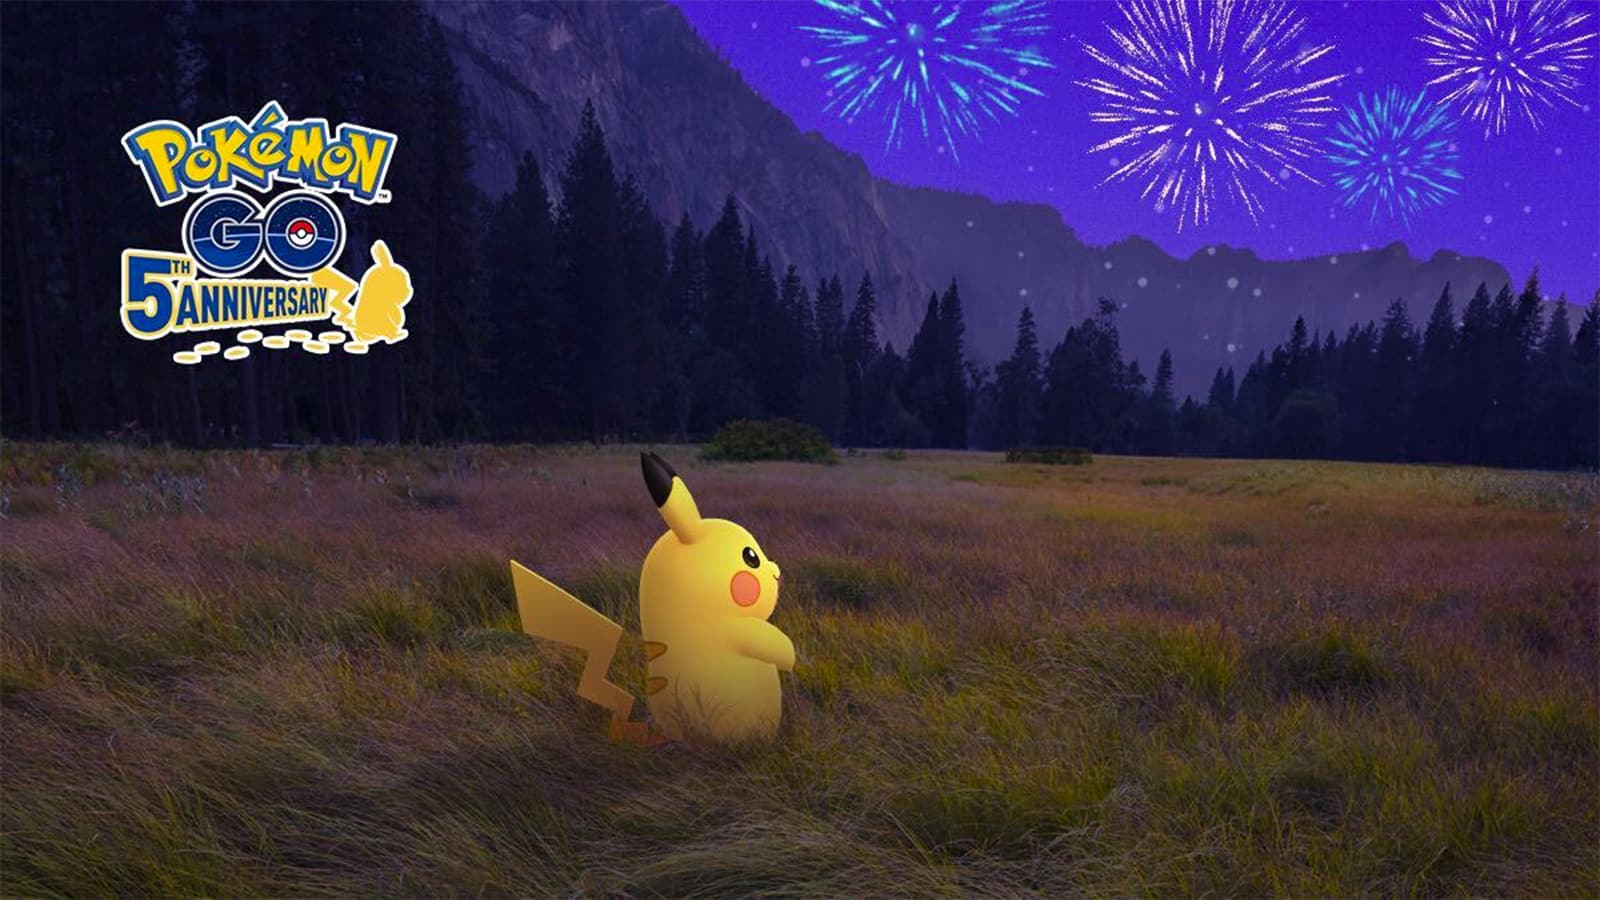 Pikachu watching fireworks in the sky in Pokemon Go's Festival of Lights